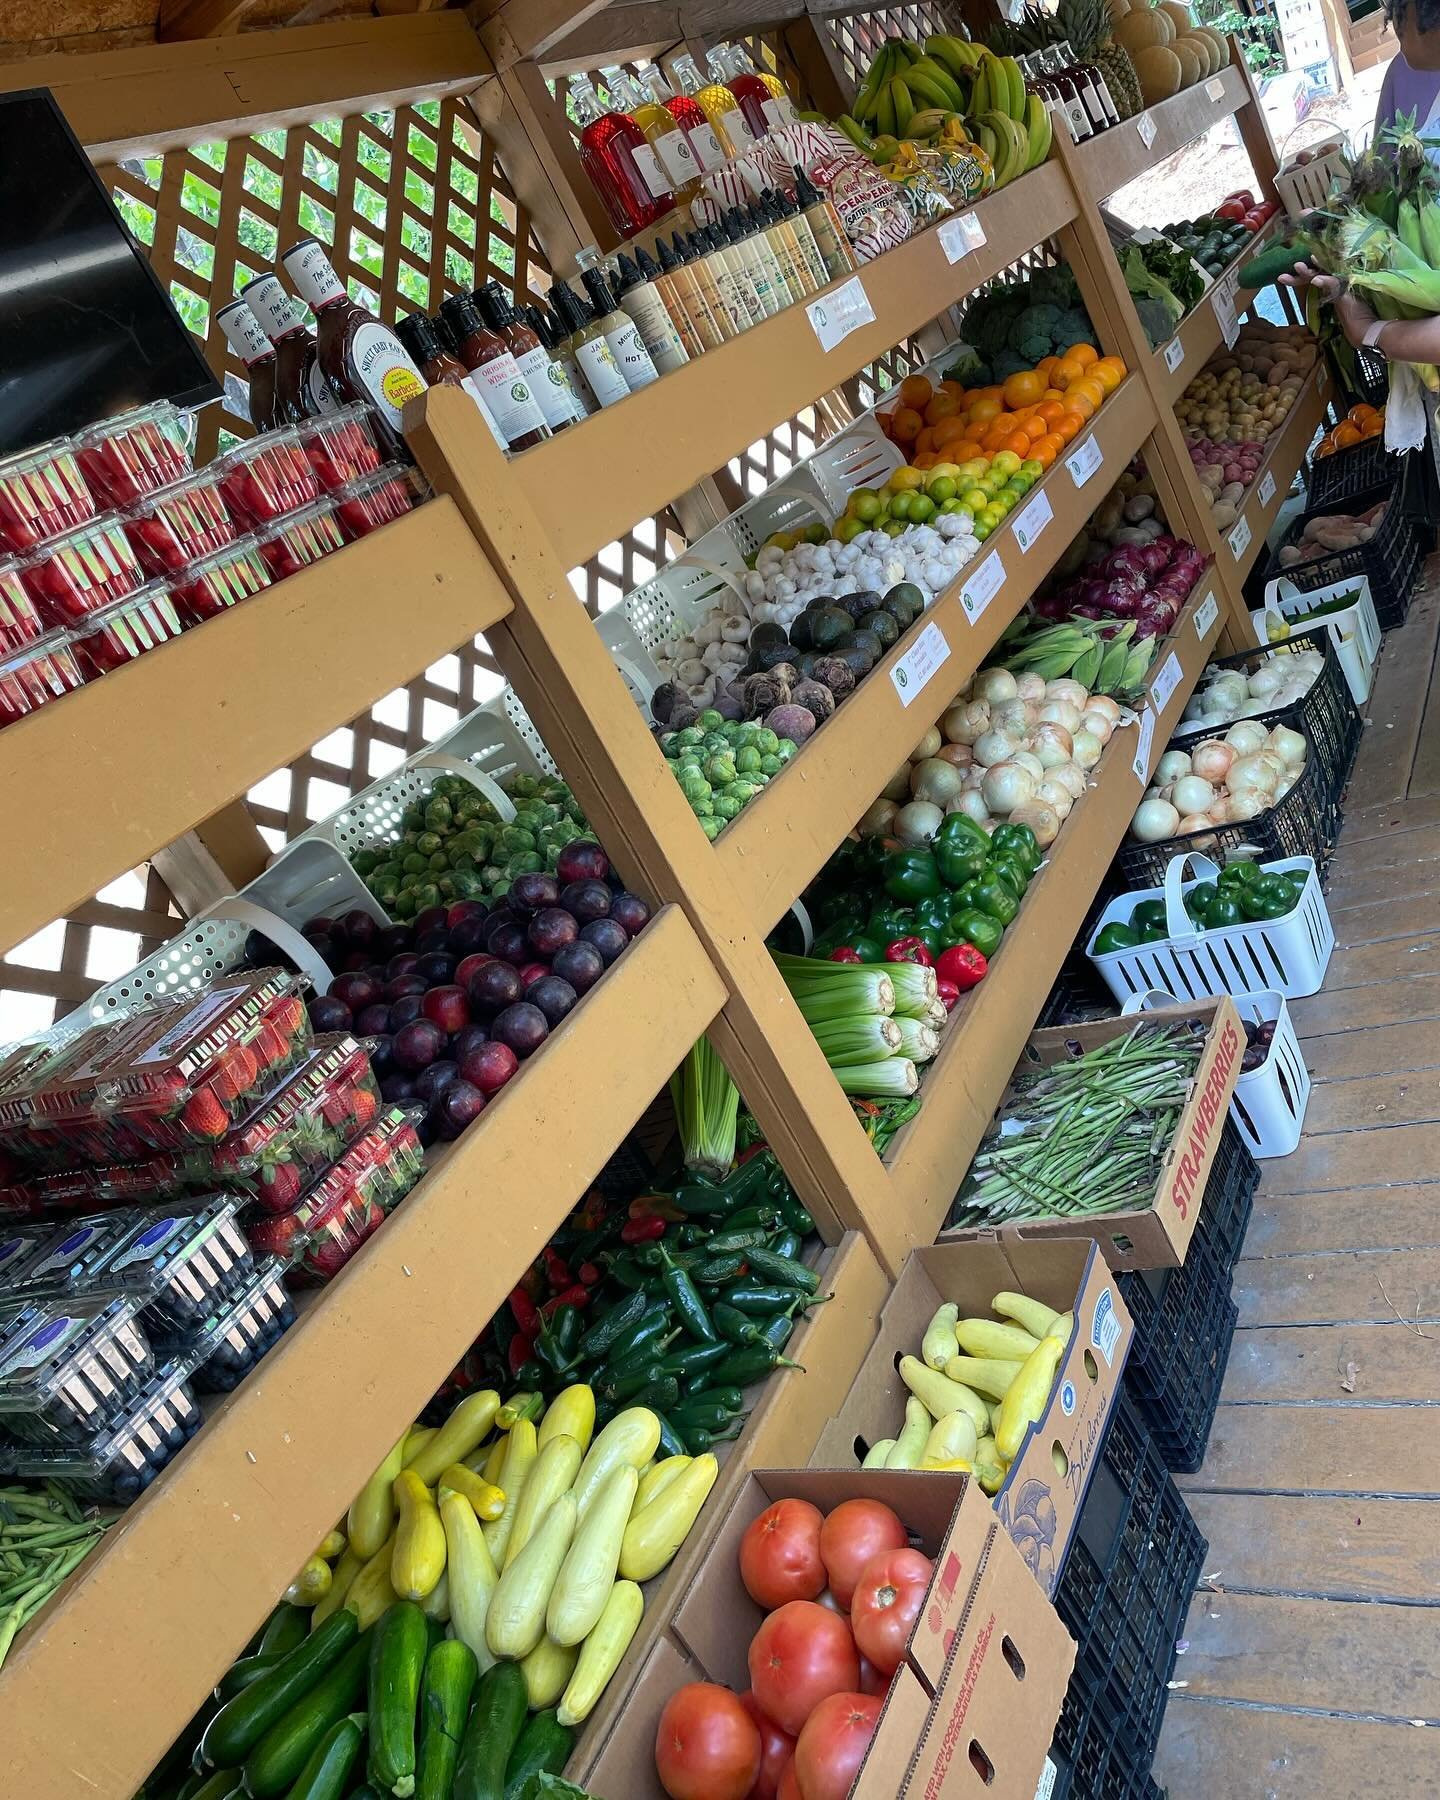 So many fresh fruits and vegetables in today!